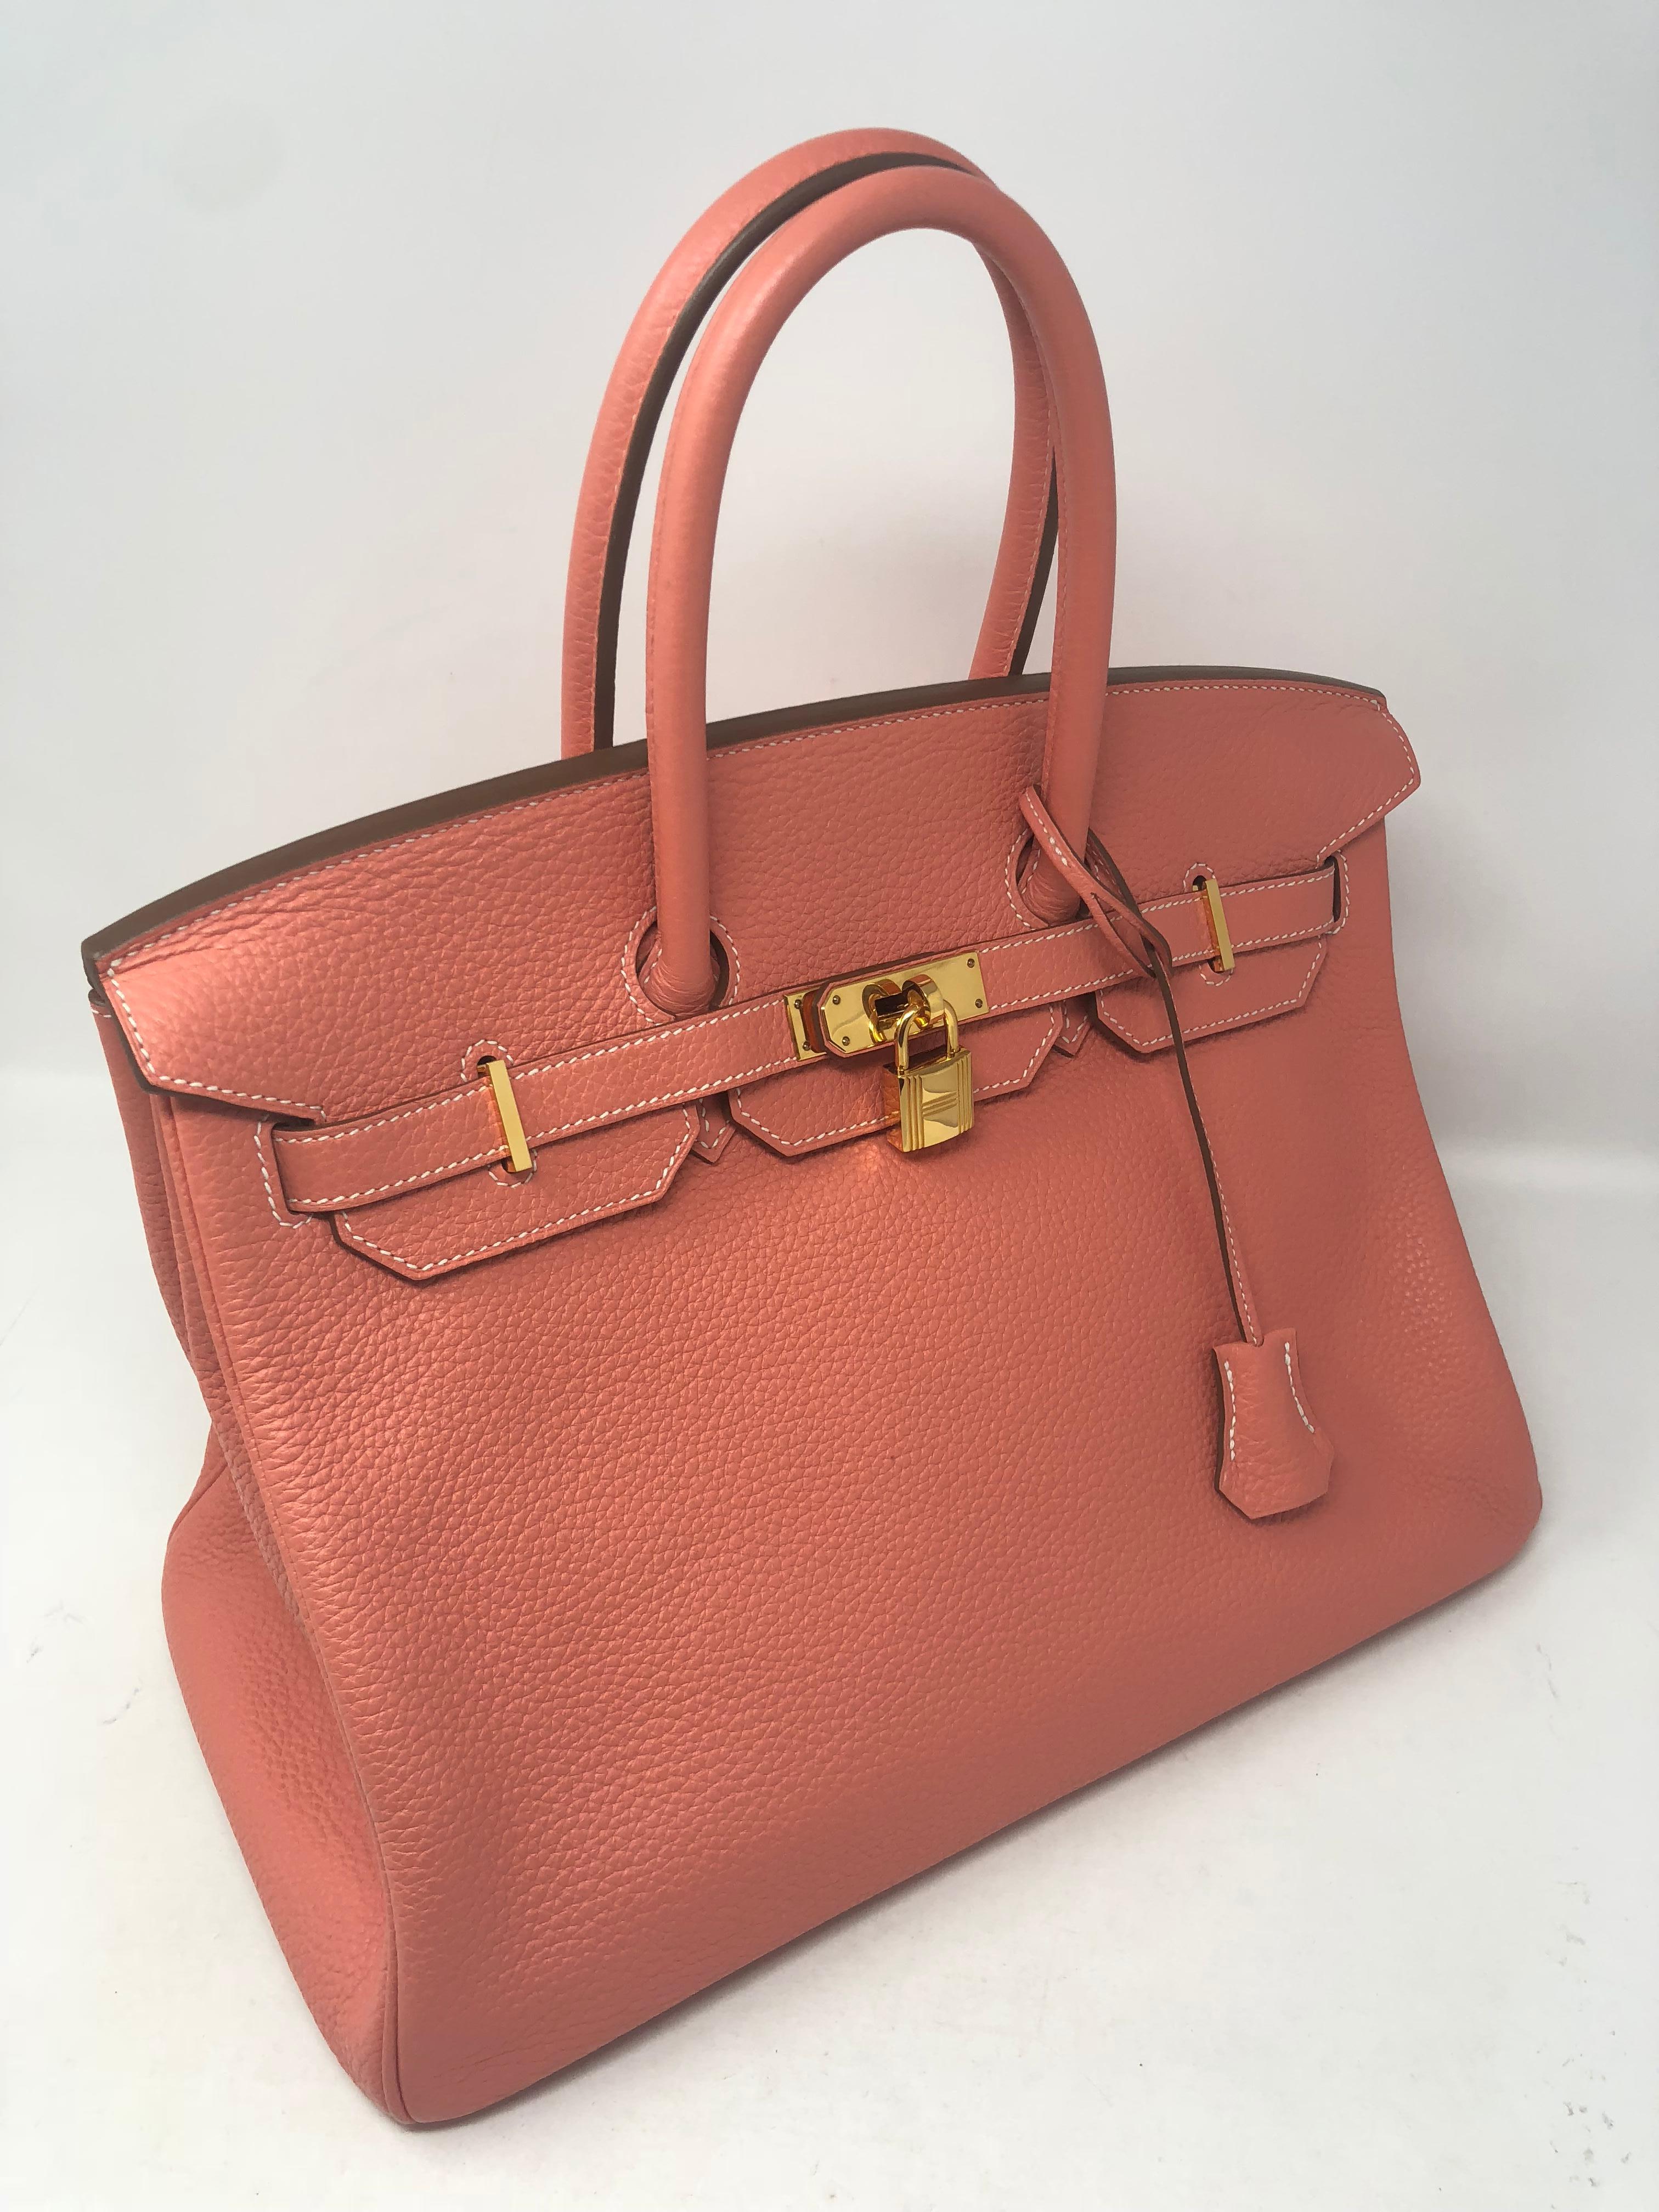 Hermes Birkin 35 in Crevette color Clemence leather with gold hardware. Beautiful bag with sturdy scratch resistant Clemence leather. The roomy interior is lined with matching pink leather and in mint condition. Q stamp from 2013. Great investment